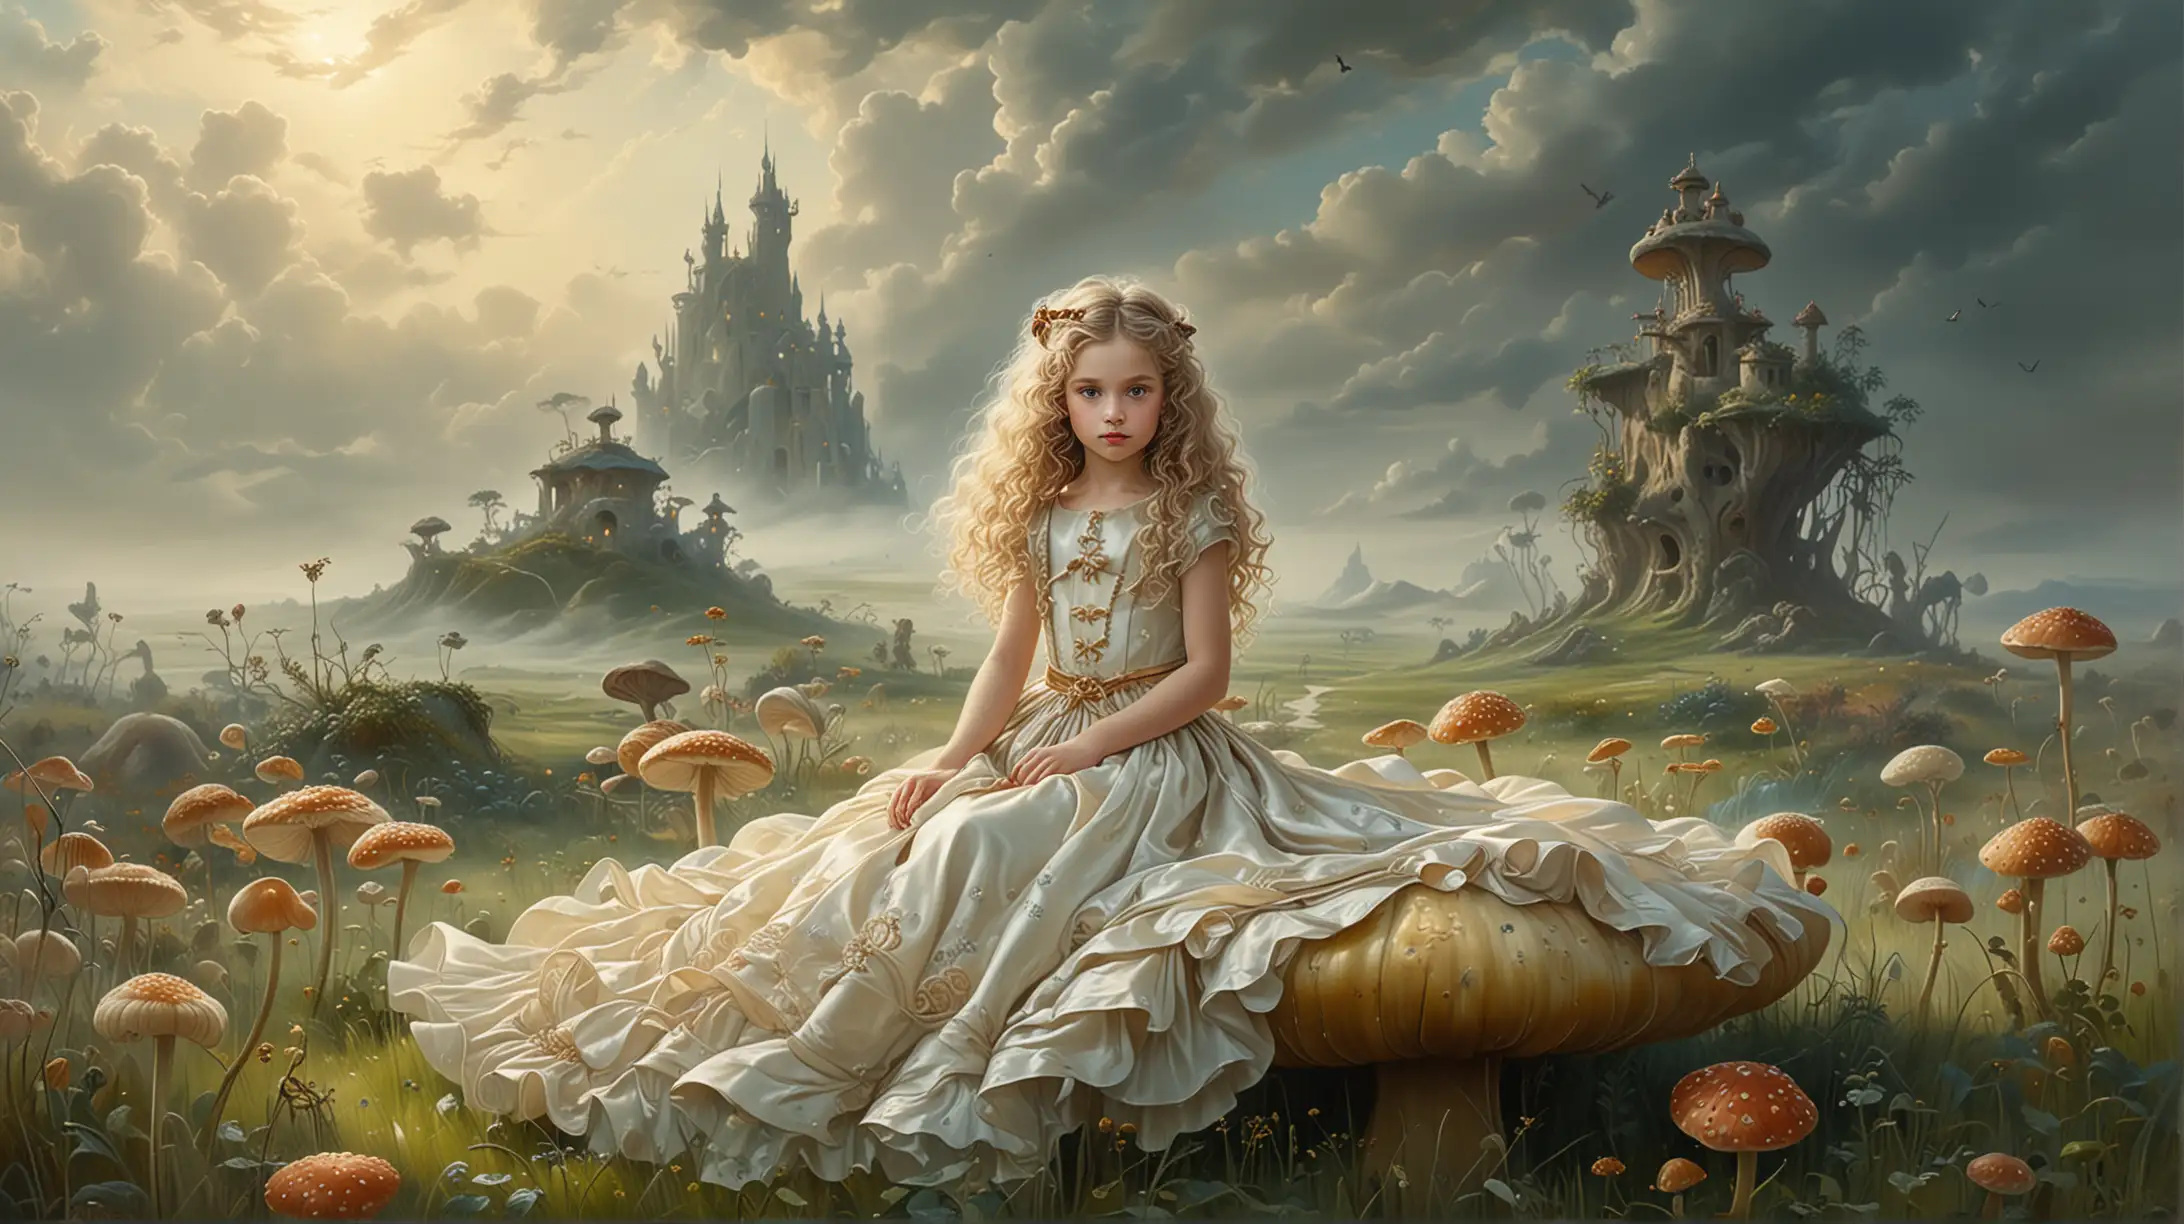 fantasy painting, in the style of salvador dalí, of a little girl with lots of very long curly hair, pale skin, wearing a haute couture dress with a ribbon belt, seating on top of a huge mushroom on a grass garden, it is early morning with a thick fog all around